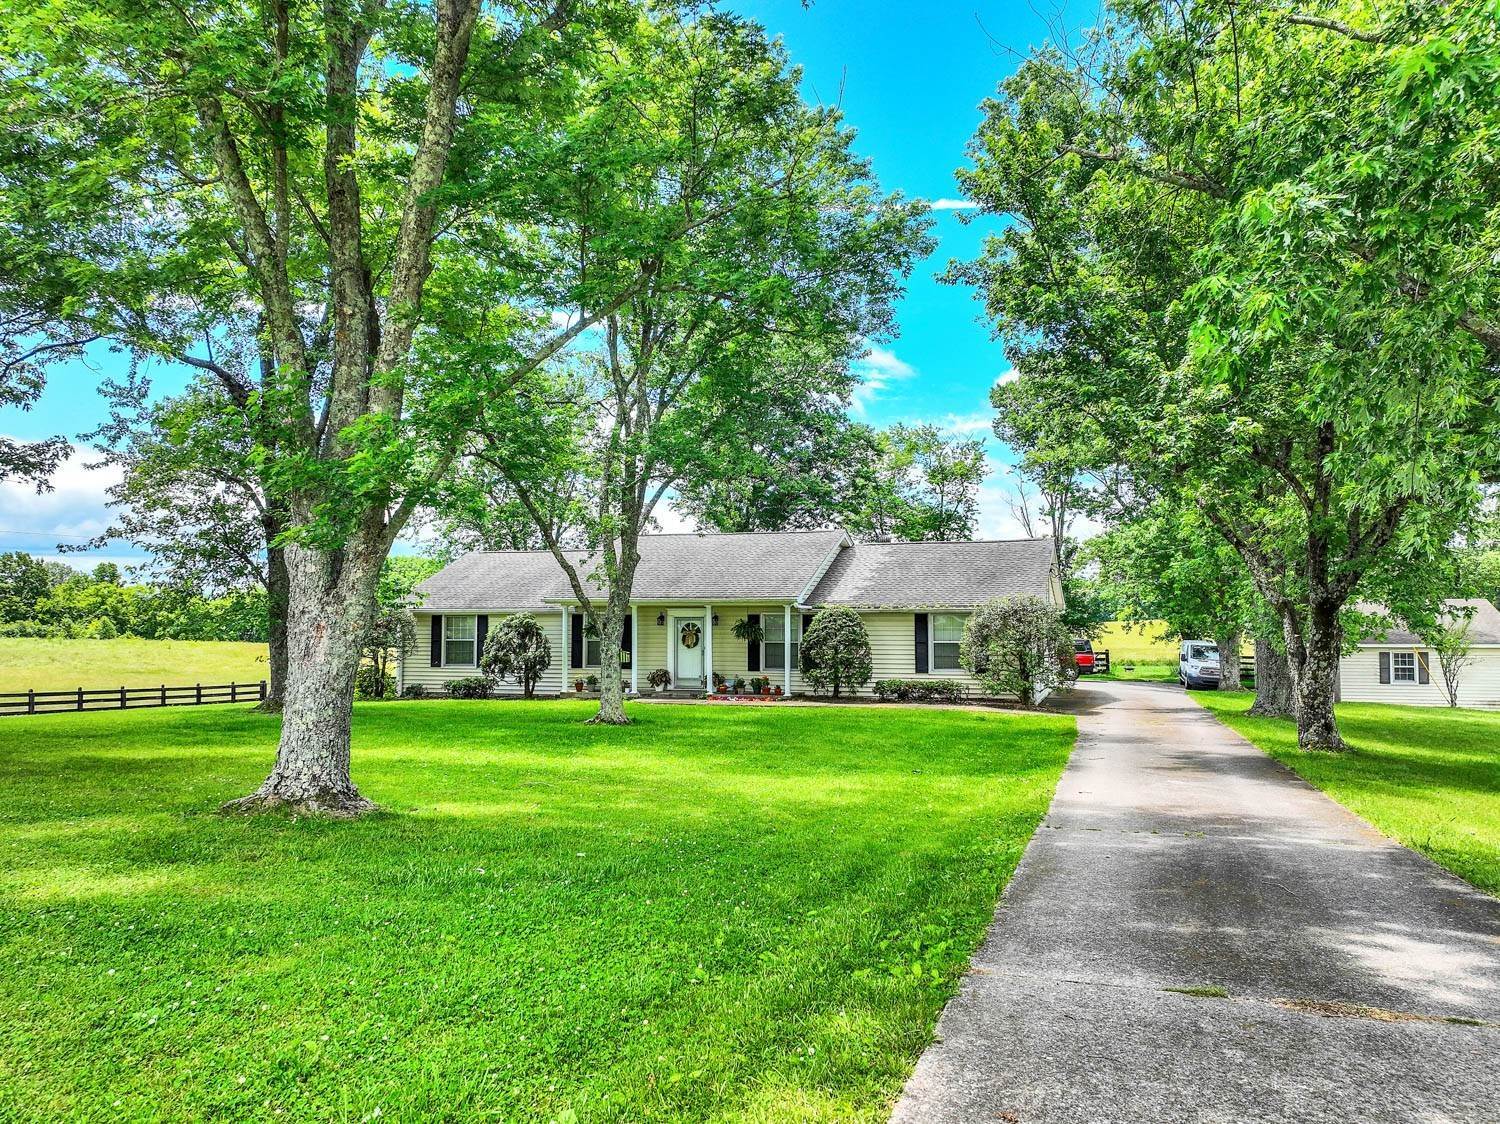 3. Farm for Sale at 2352 Horn Springs Road Lebanon, Tennessee 37087 United States